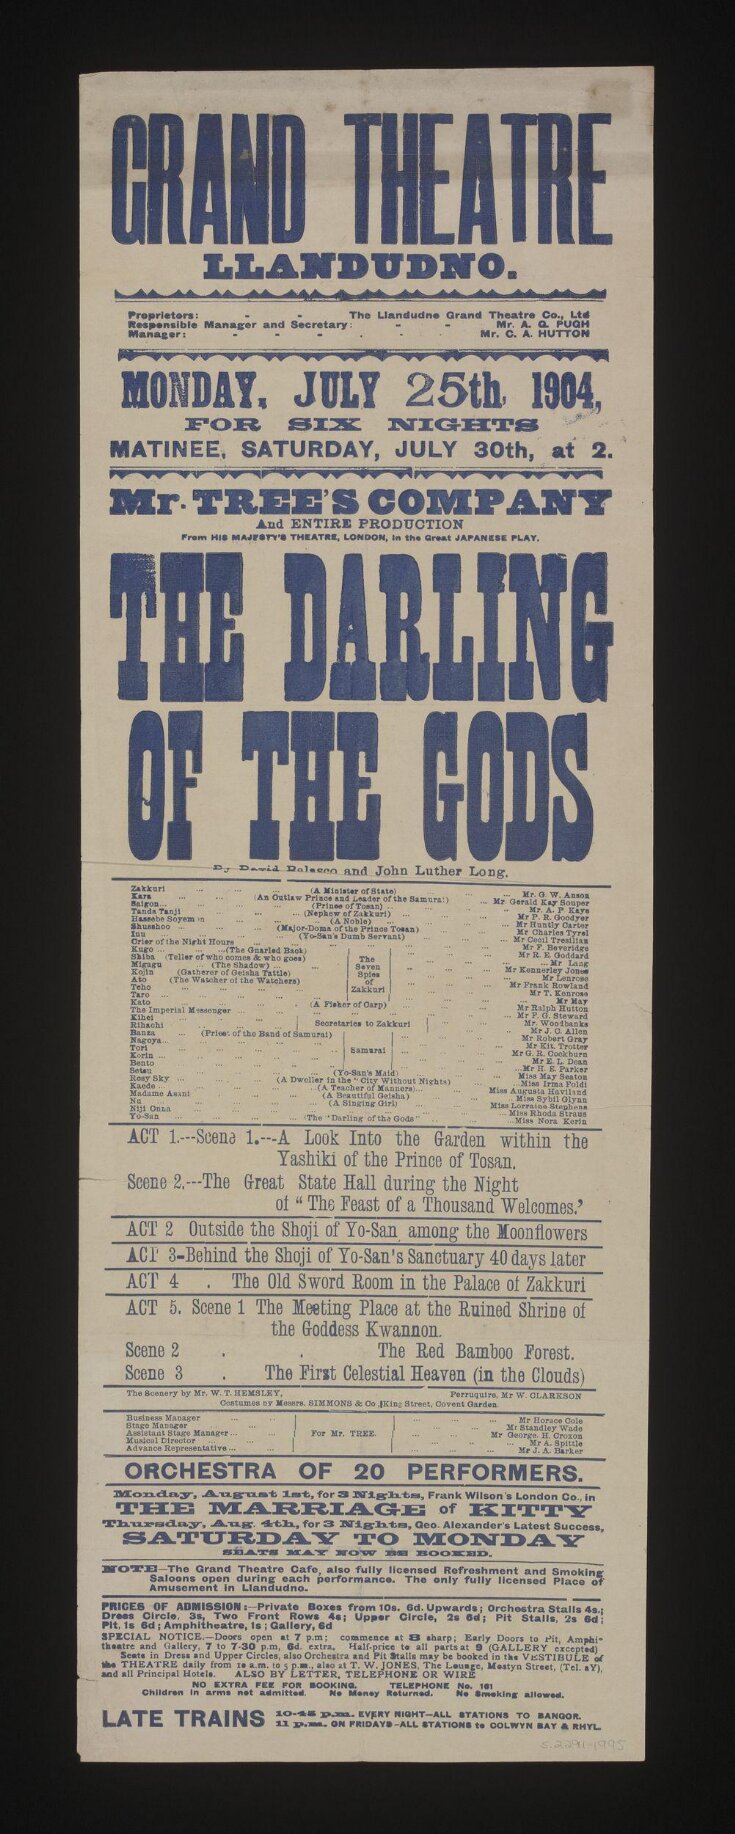 The Darling of the Gods poster top image